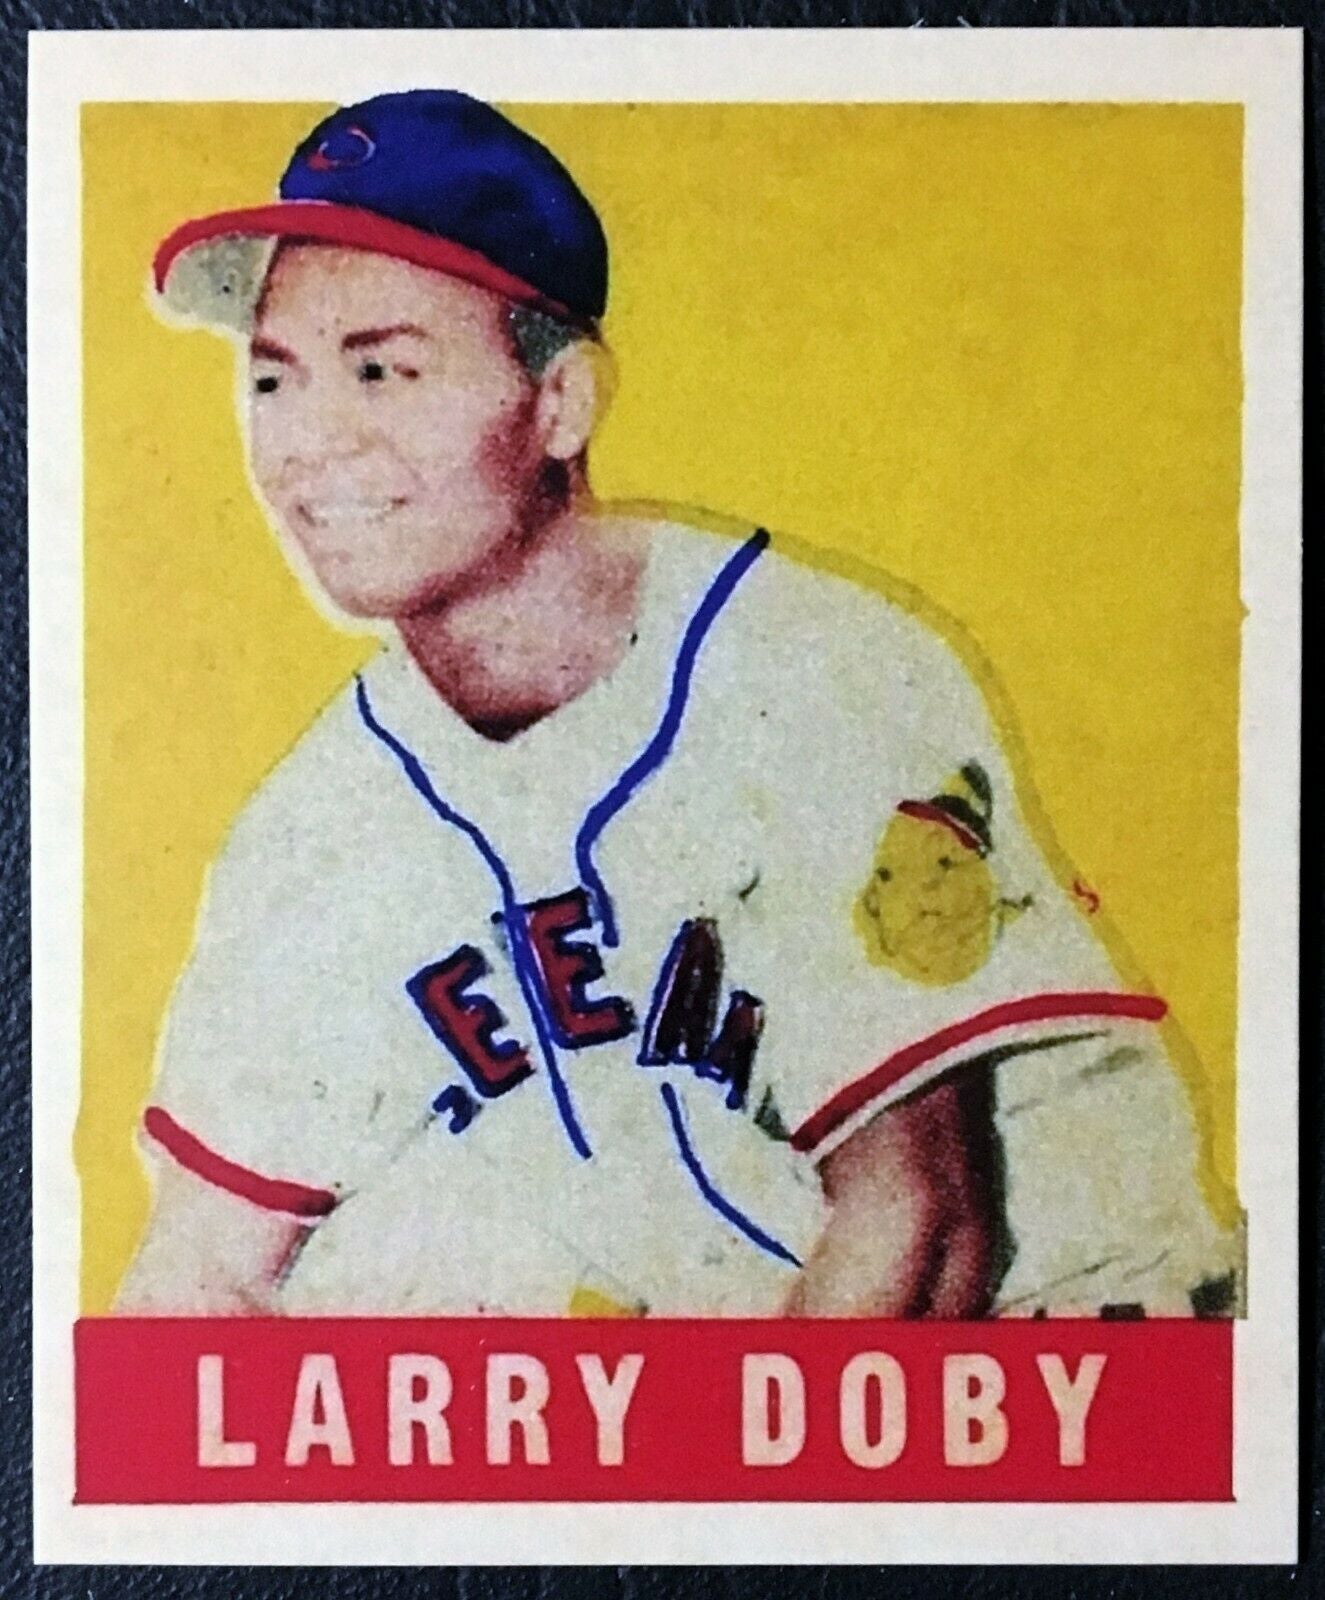 larry doby indians jersey